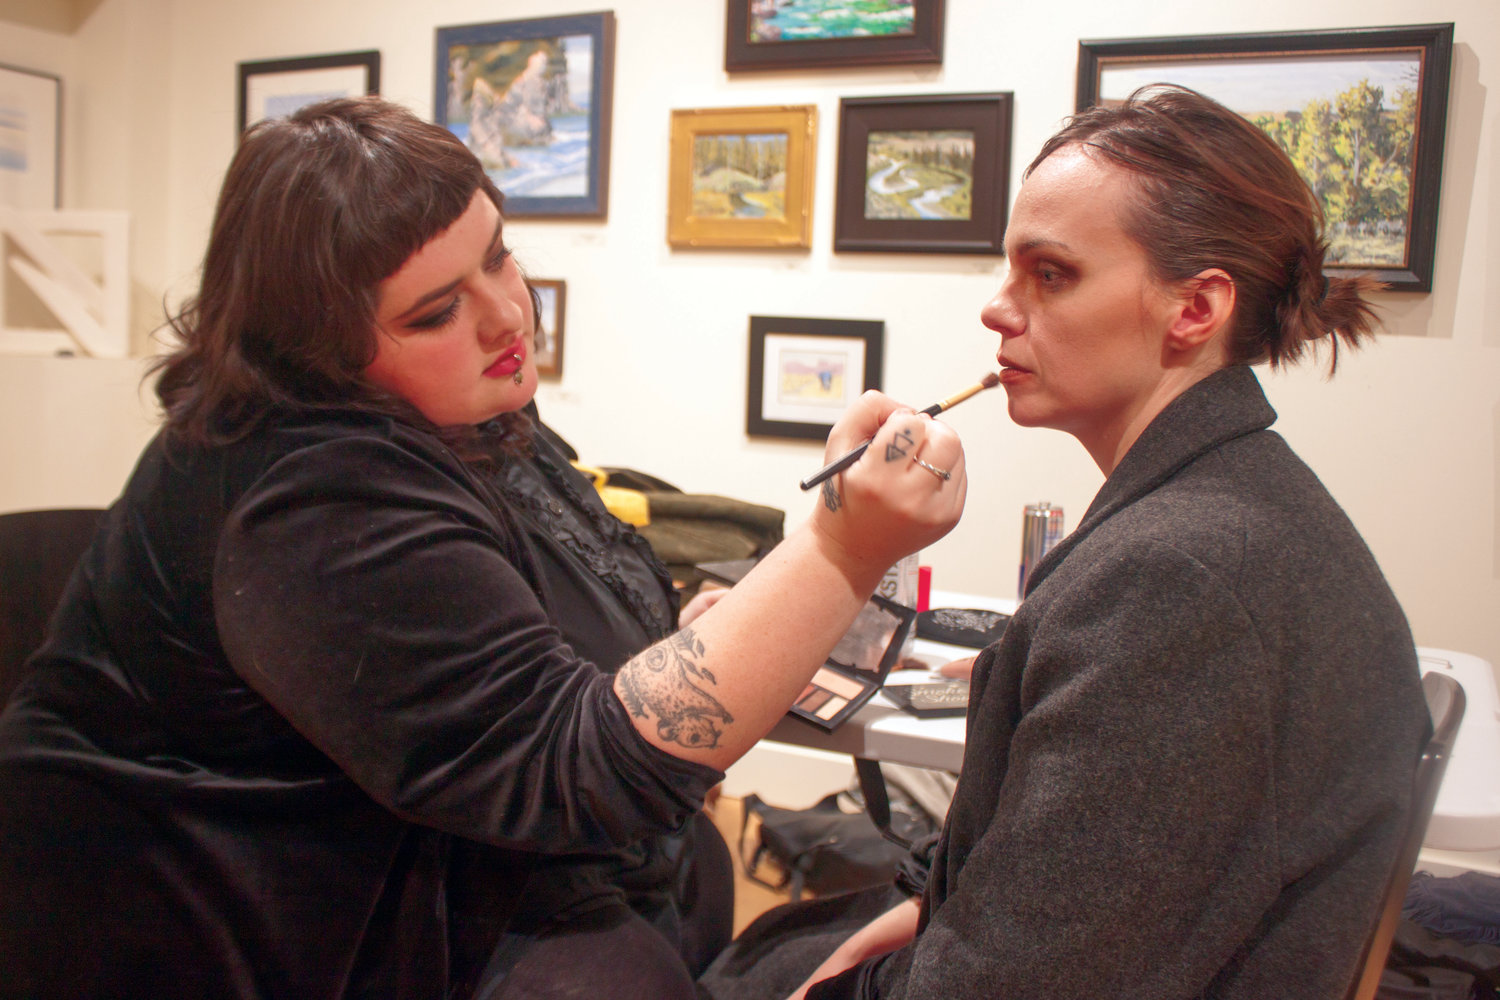 Makeup artist Susie Schaeffer (left) applies the finishing touches to lead actress Bernadette Cuvalo for the Nov. 18 shoot of “She the Creator” at Northwind Arts Center.